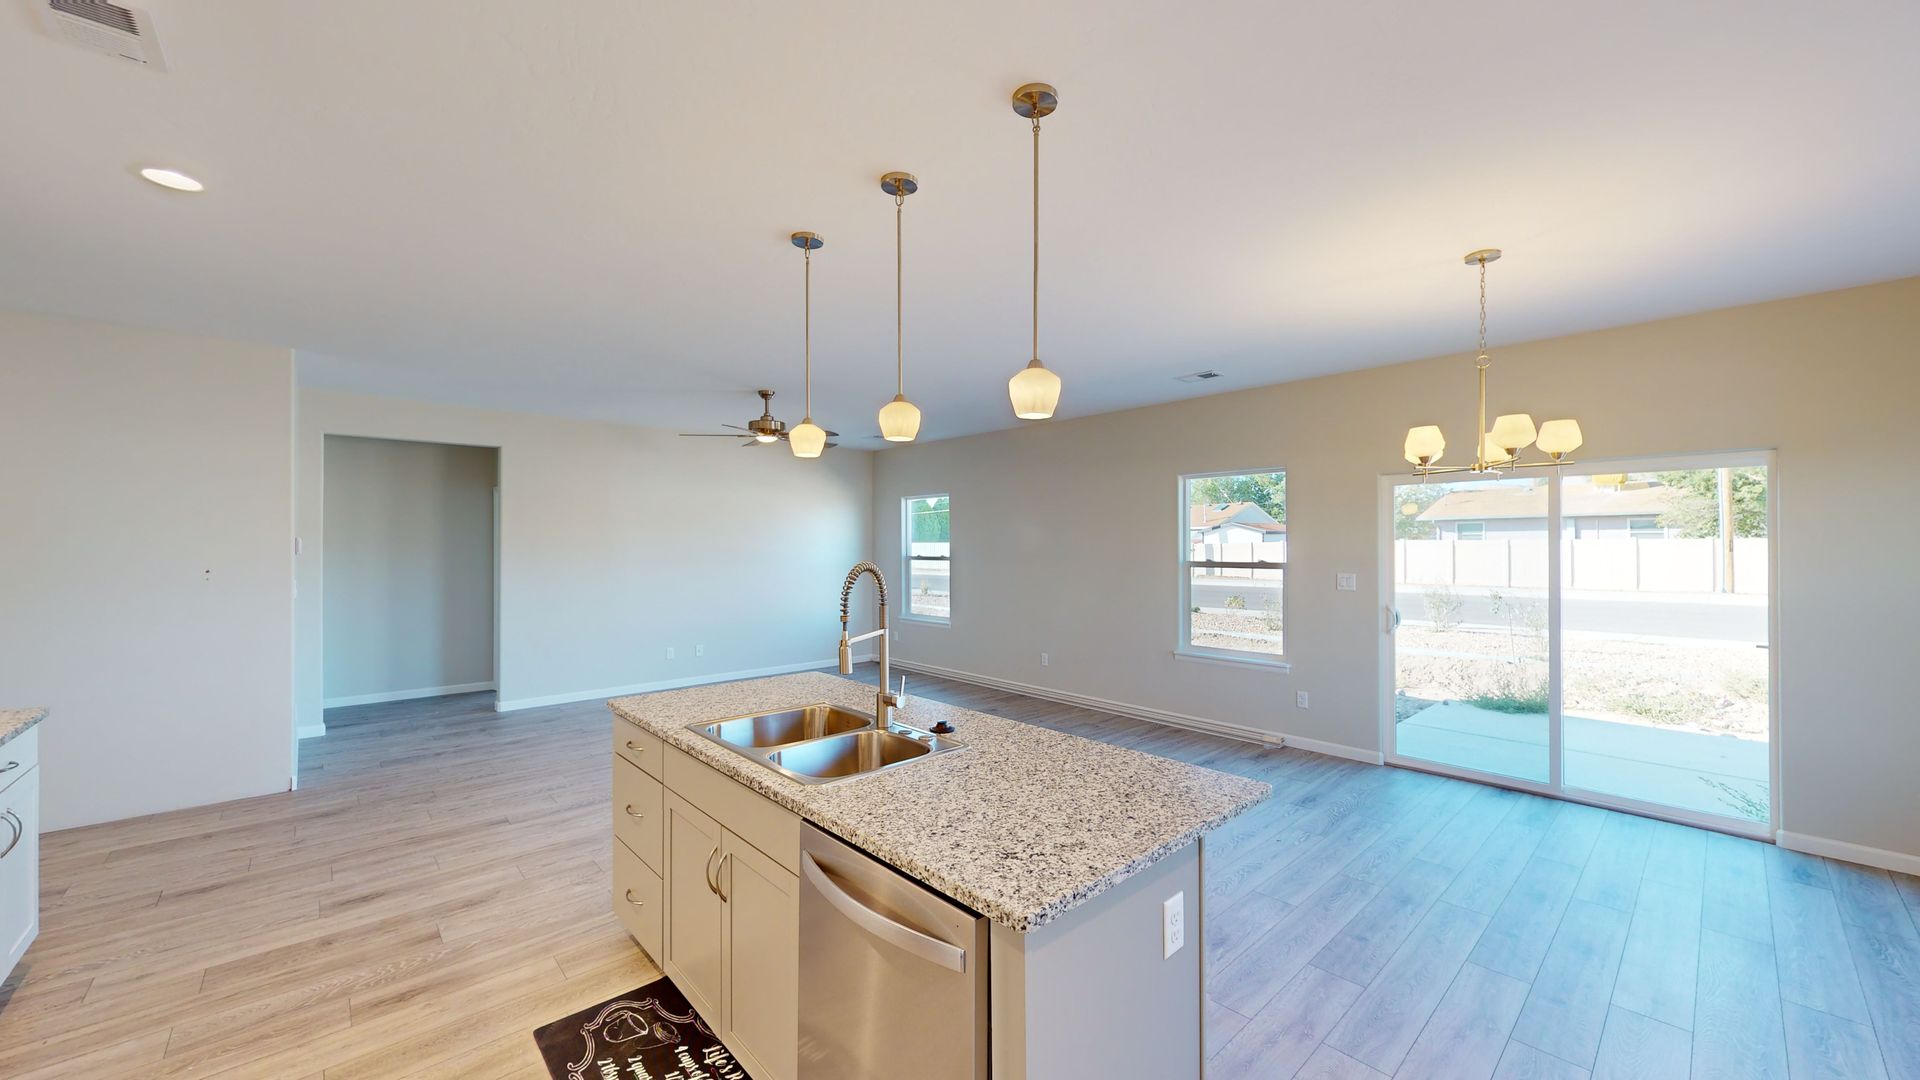 Great room with white kitchen with granite counter tops